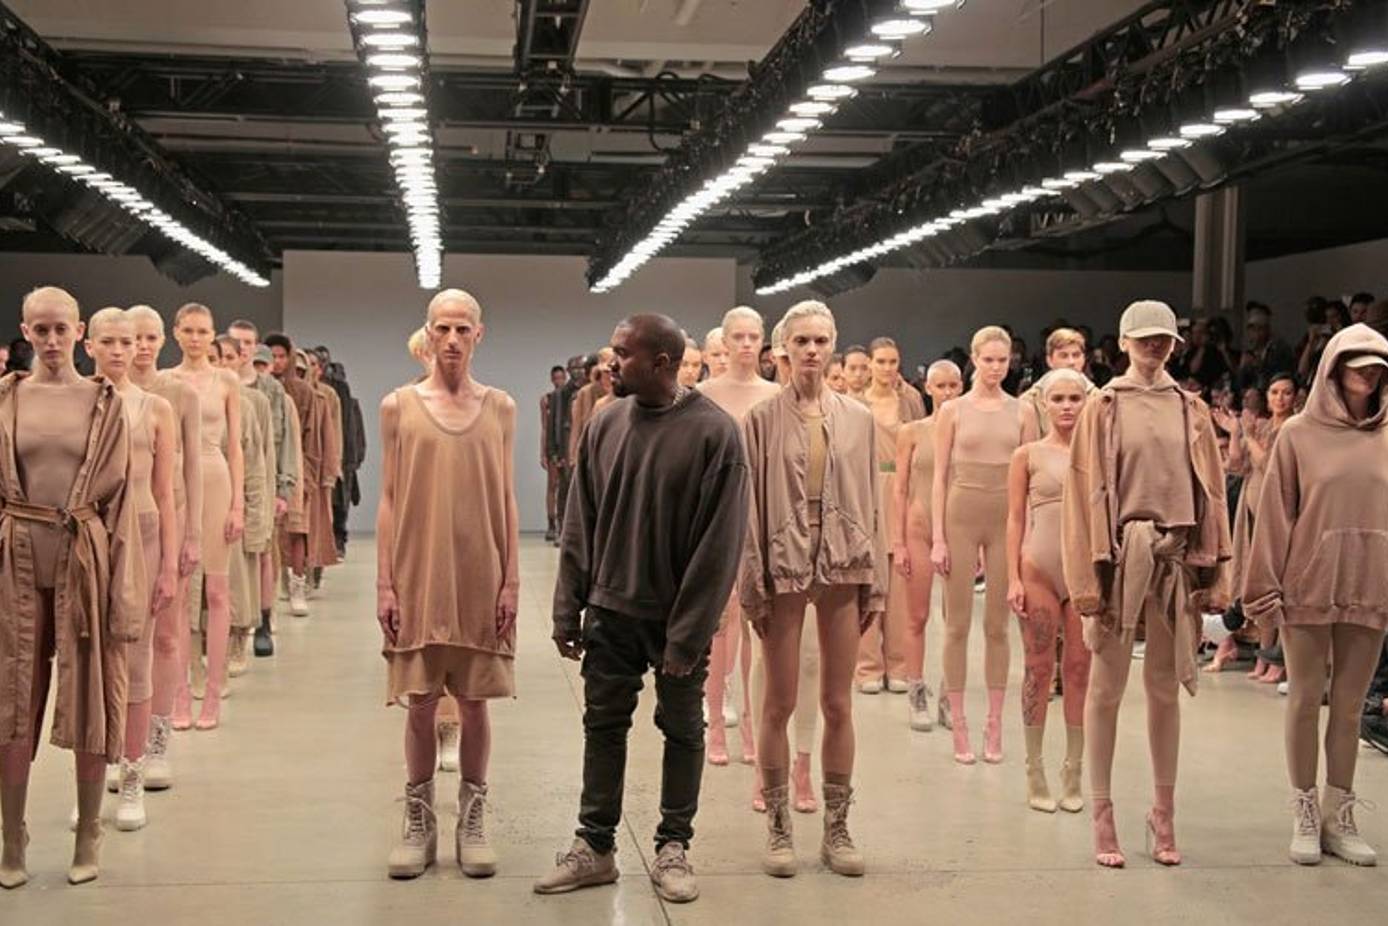 Kanye West's Height Unveiled: Is He Really 5'8? - SarkariResult